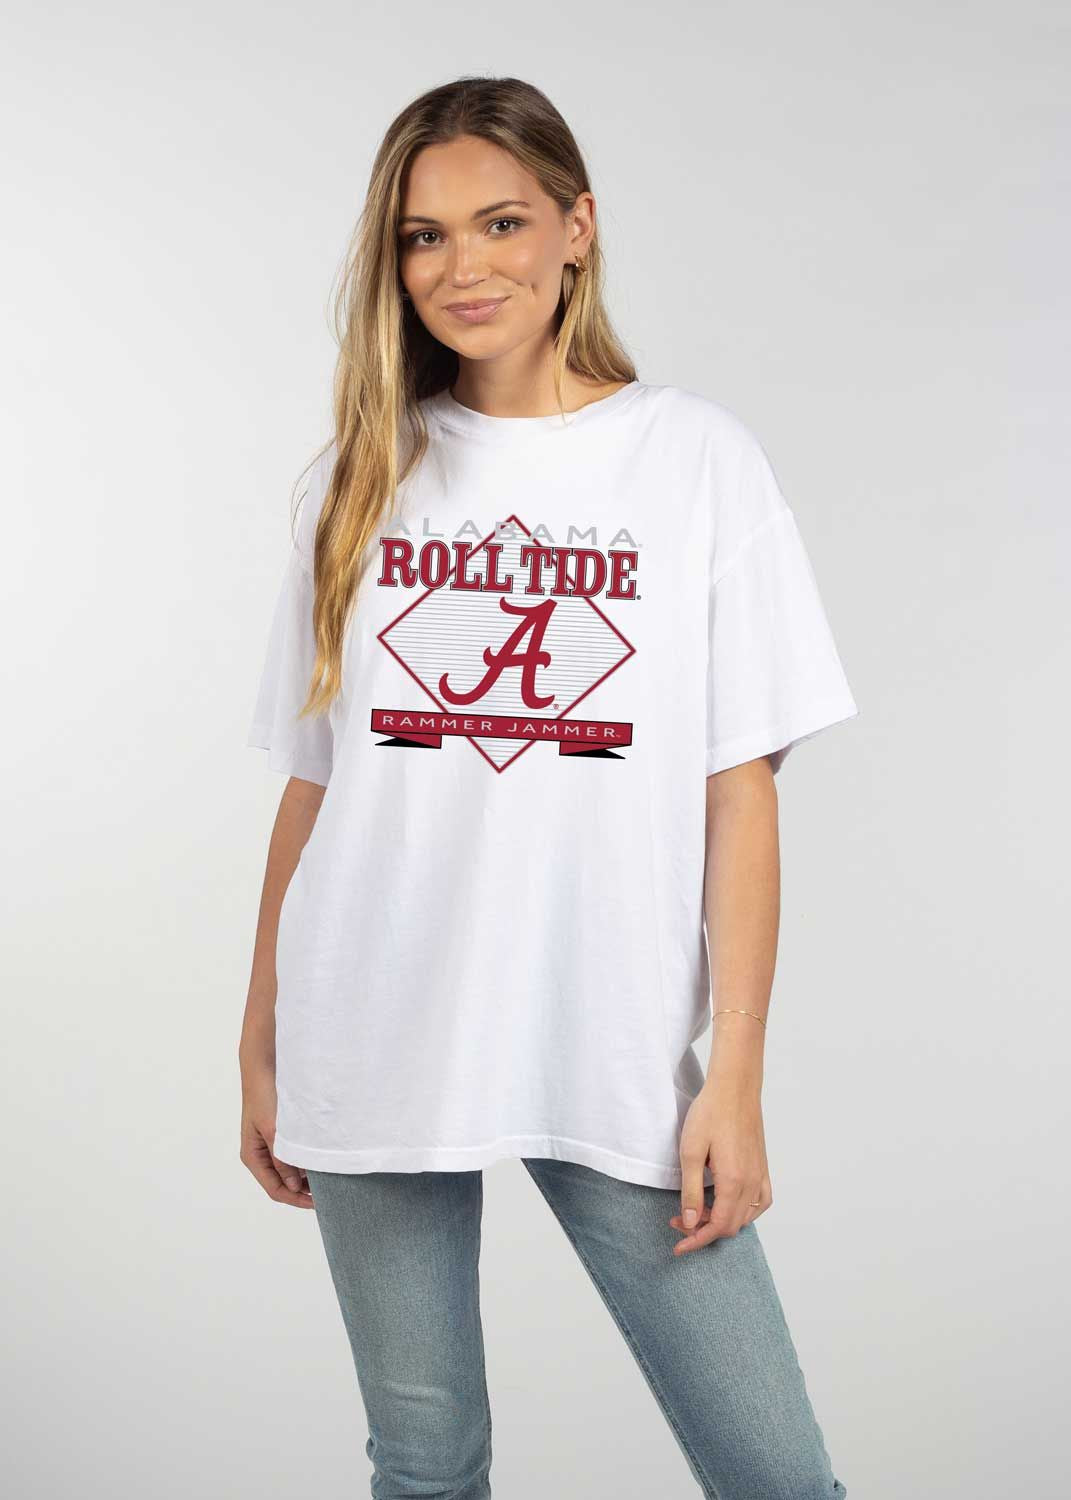 Chicka-D Roll Tide Oversized Tee